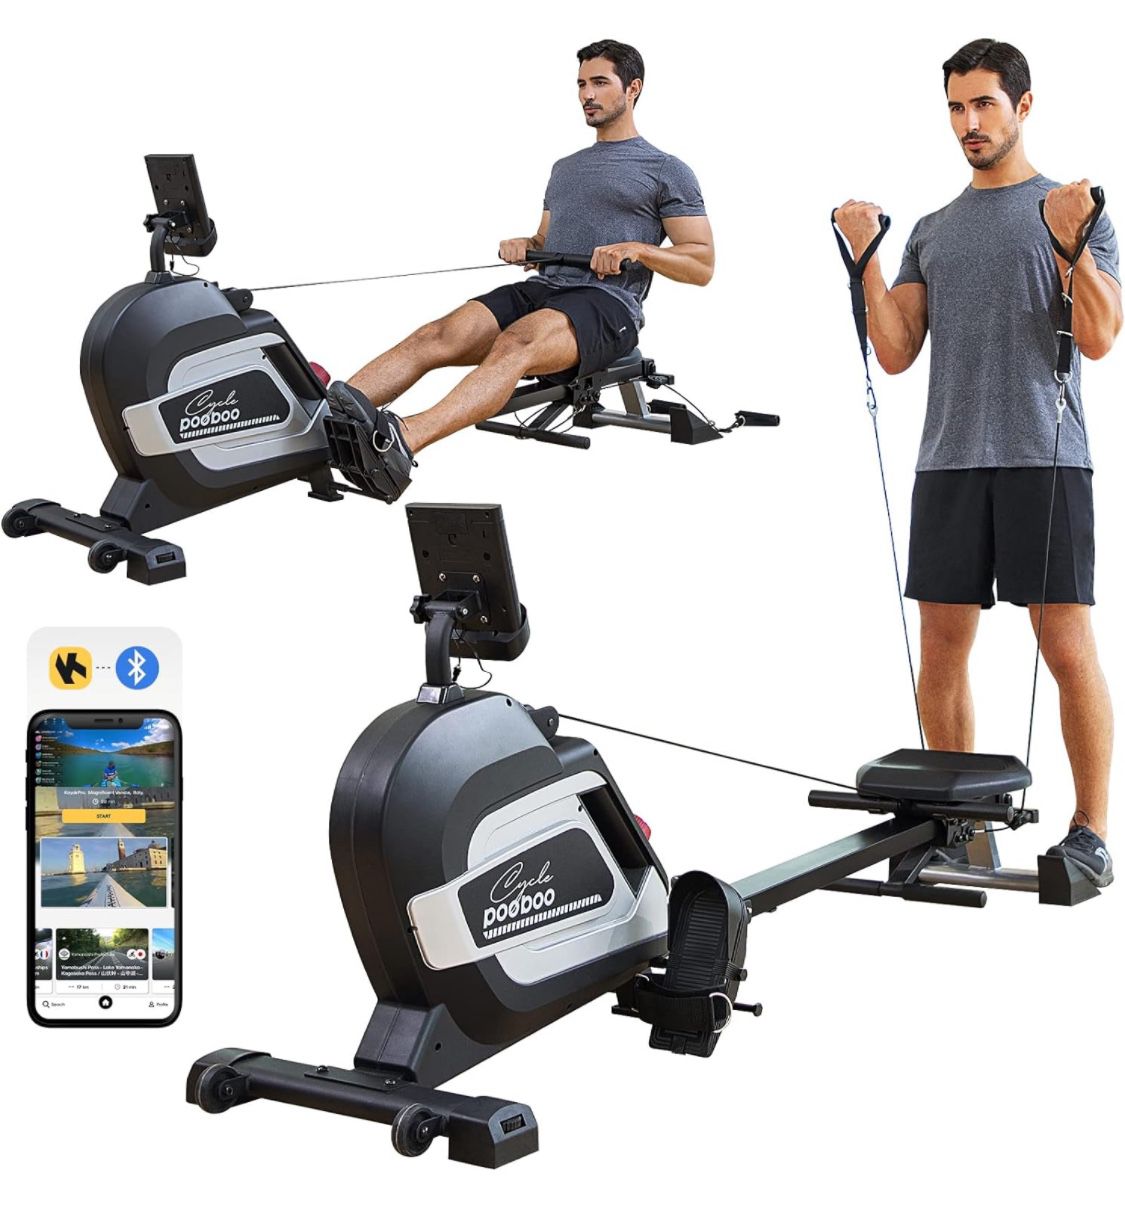 Pooboo Magnetic Rowing Machine Home workout equipment